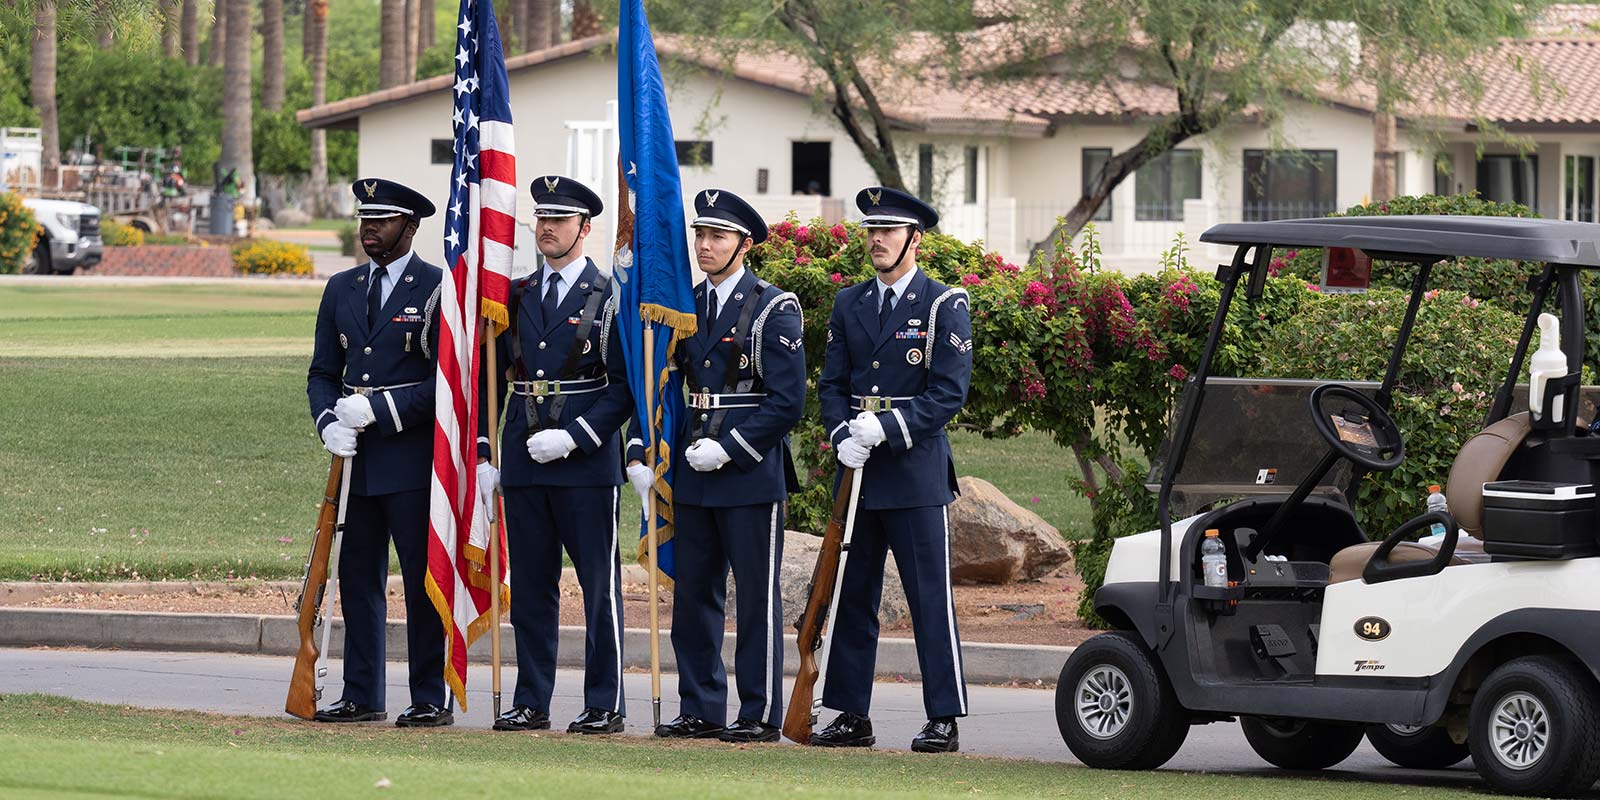 Honor Guard holding the colors at the 14th Annual Golf Classic.